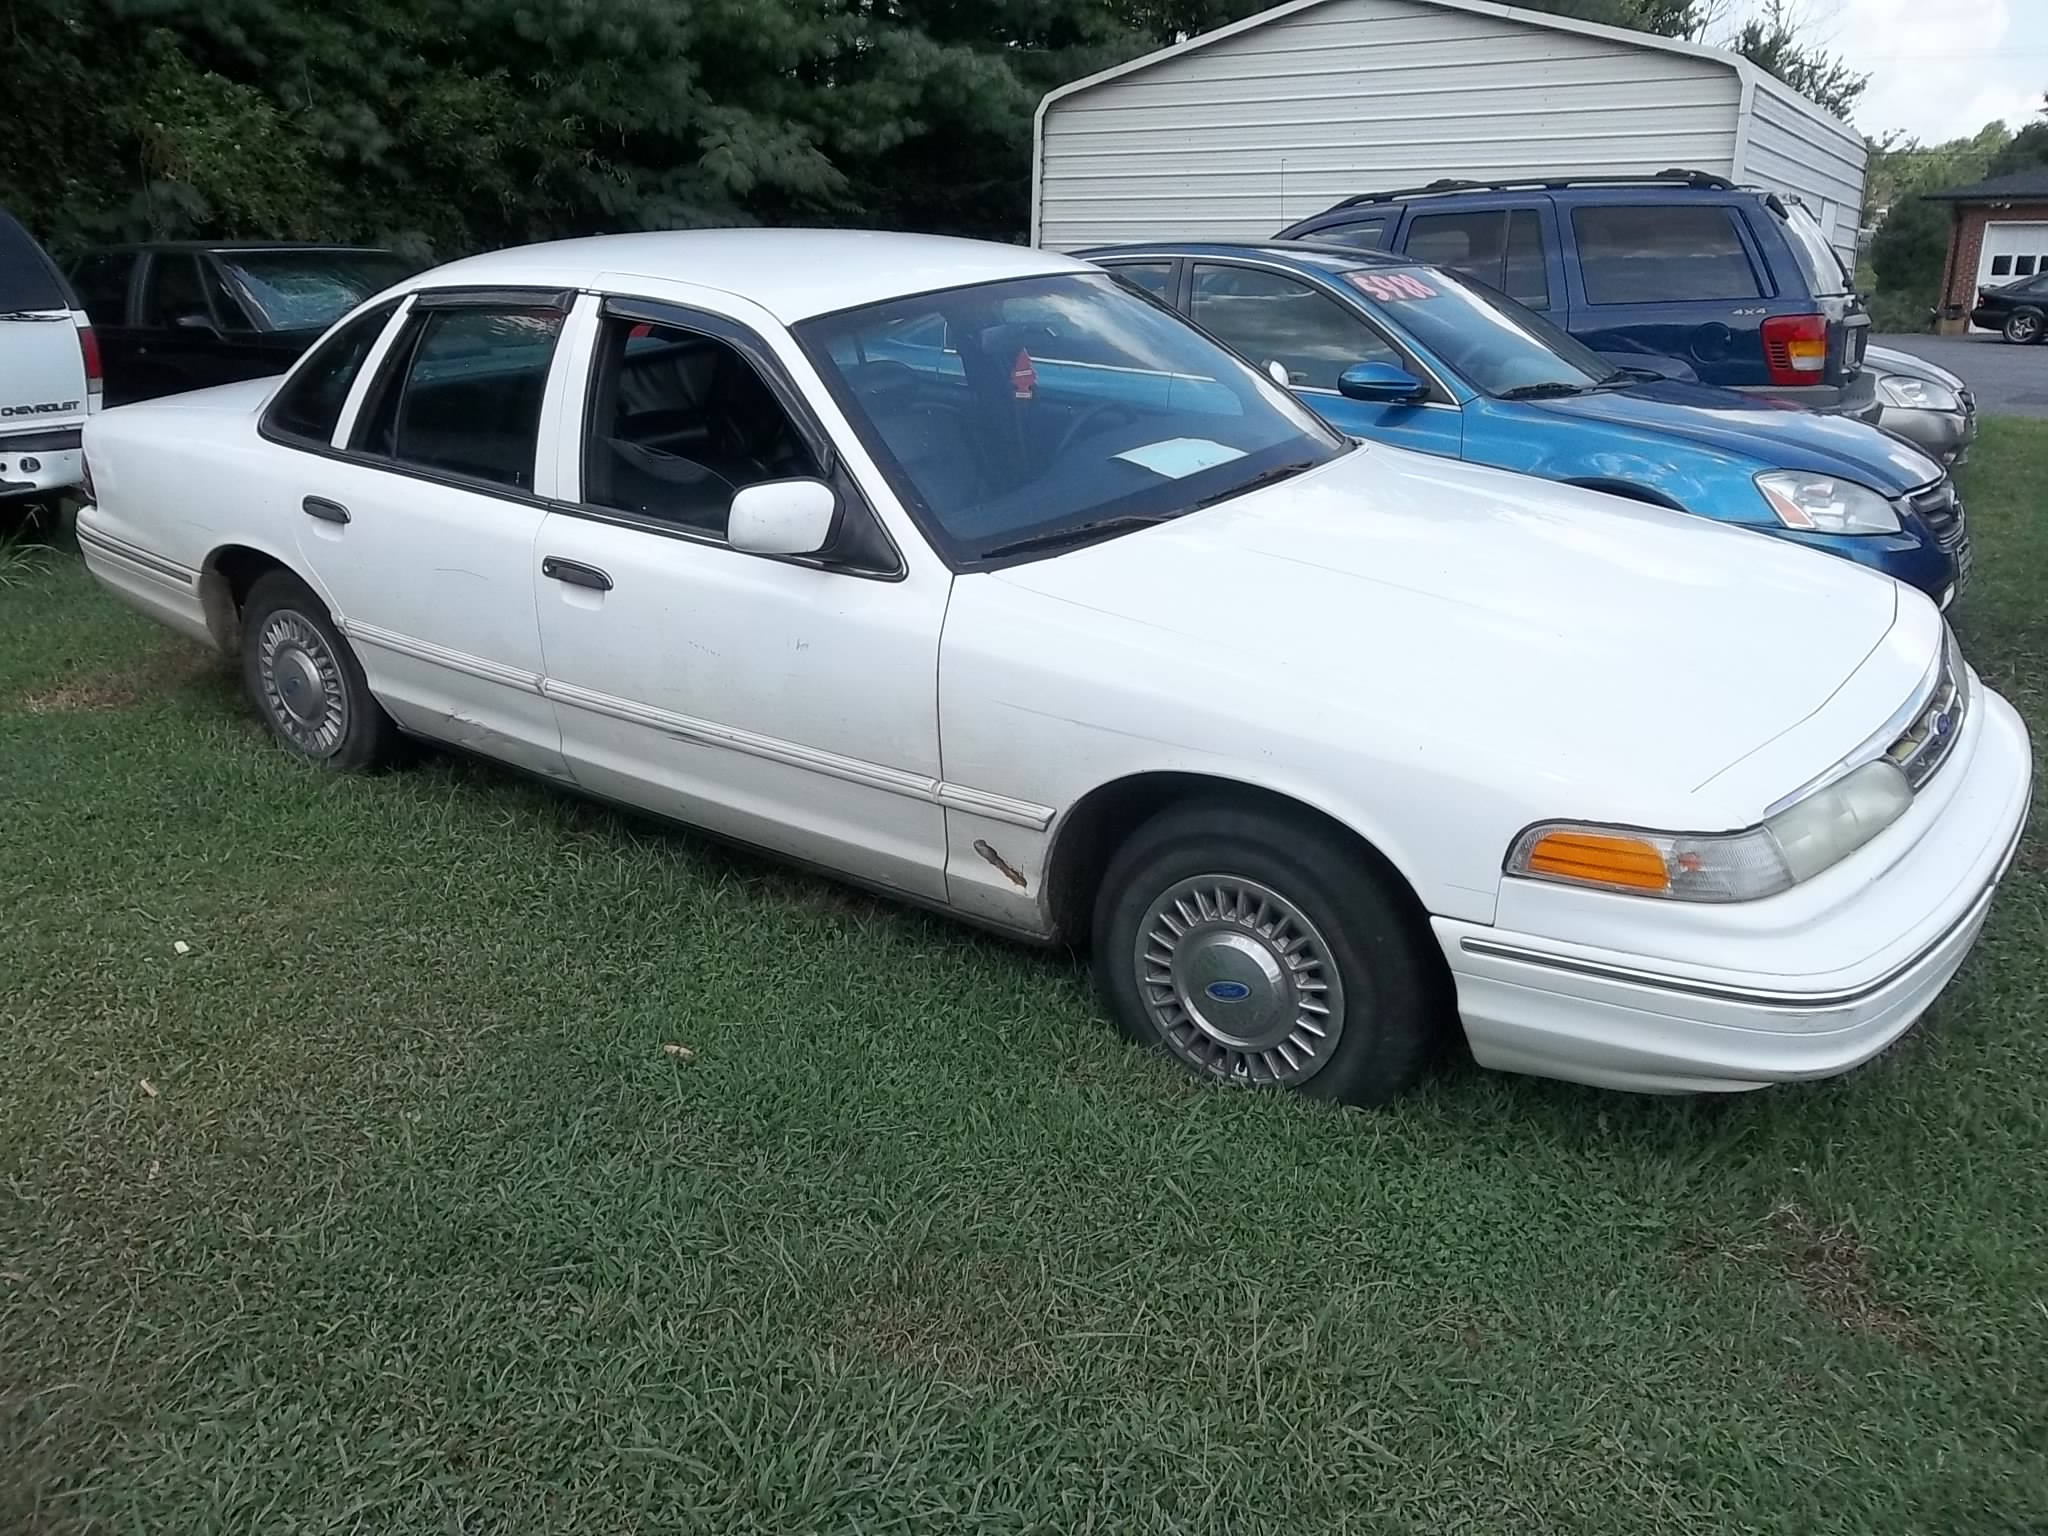 1996 Ford crown victoria mpg